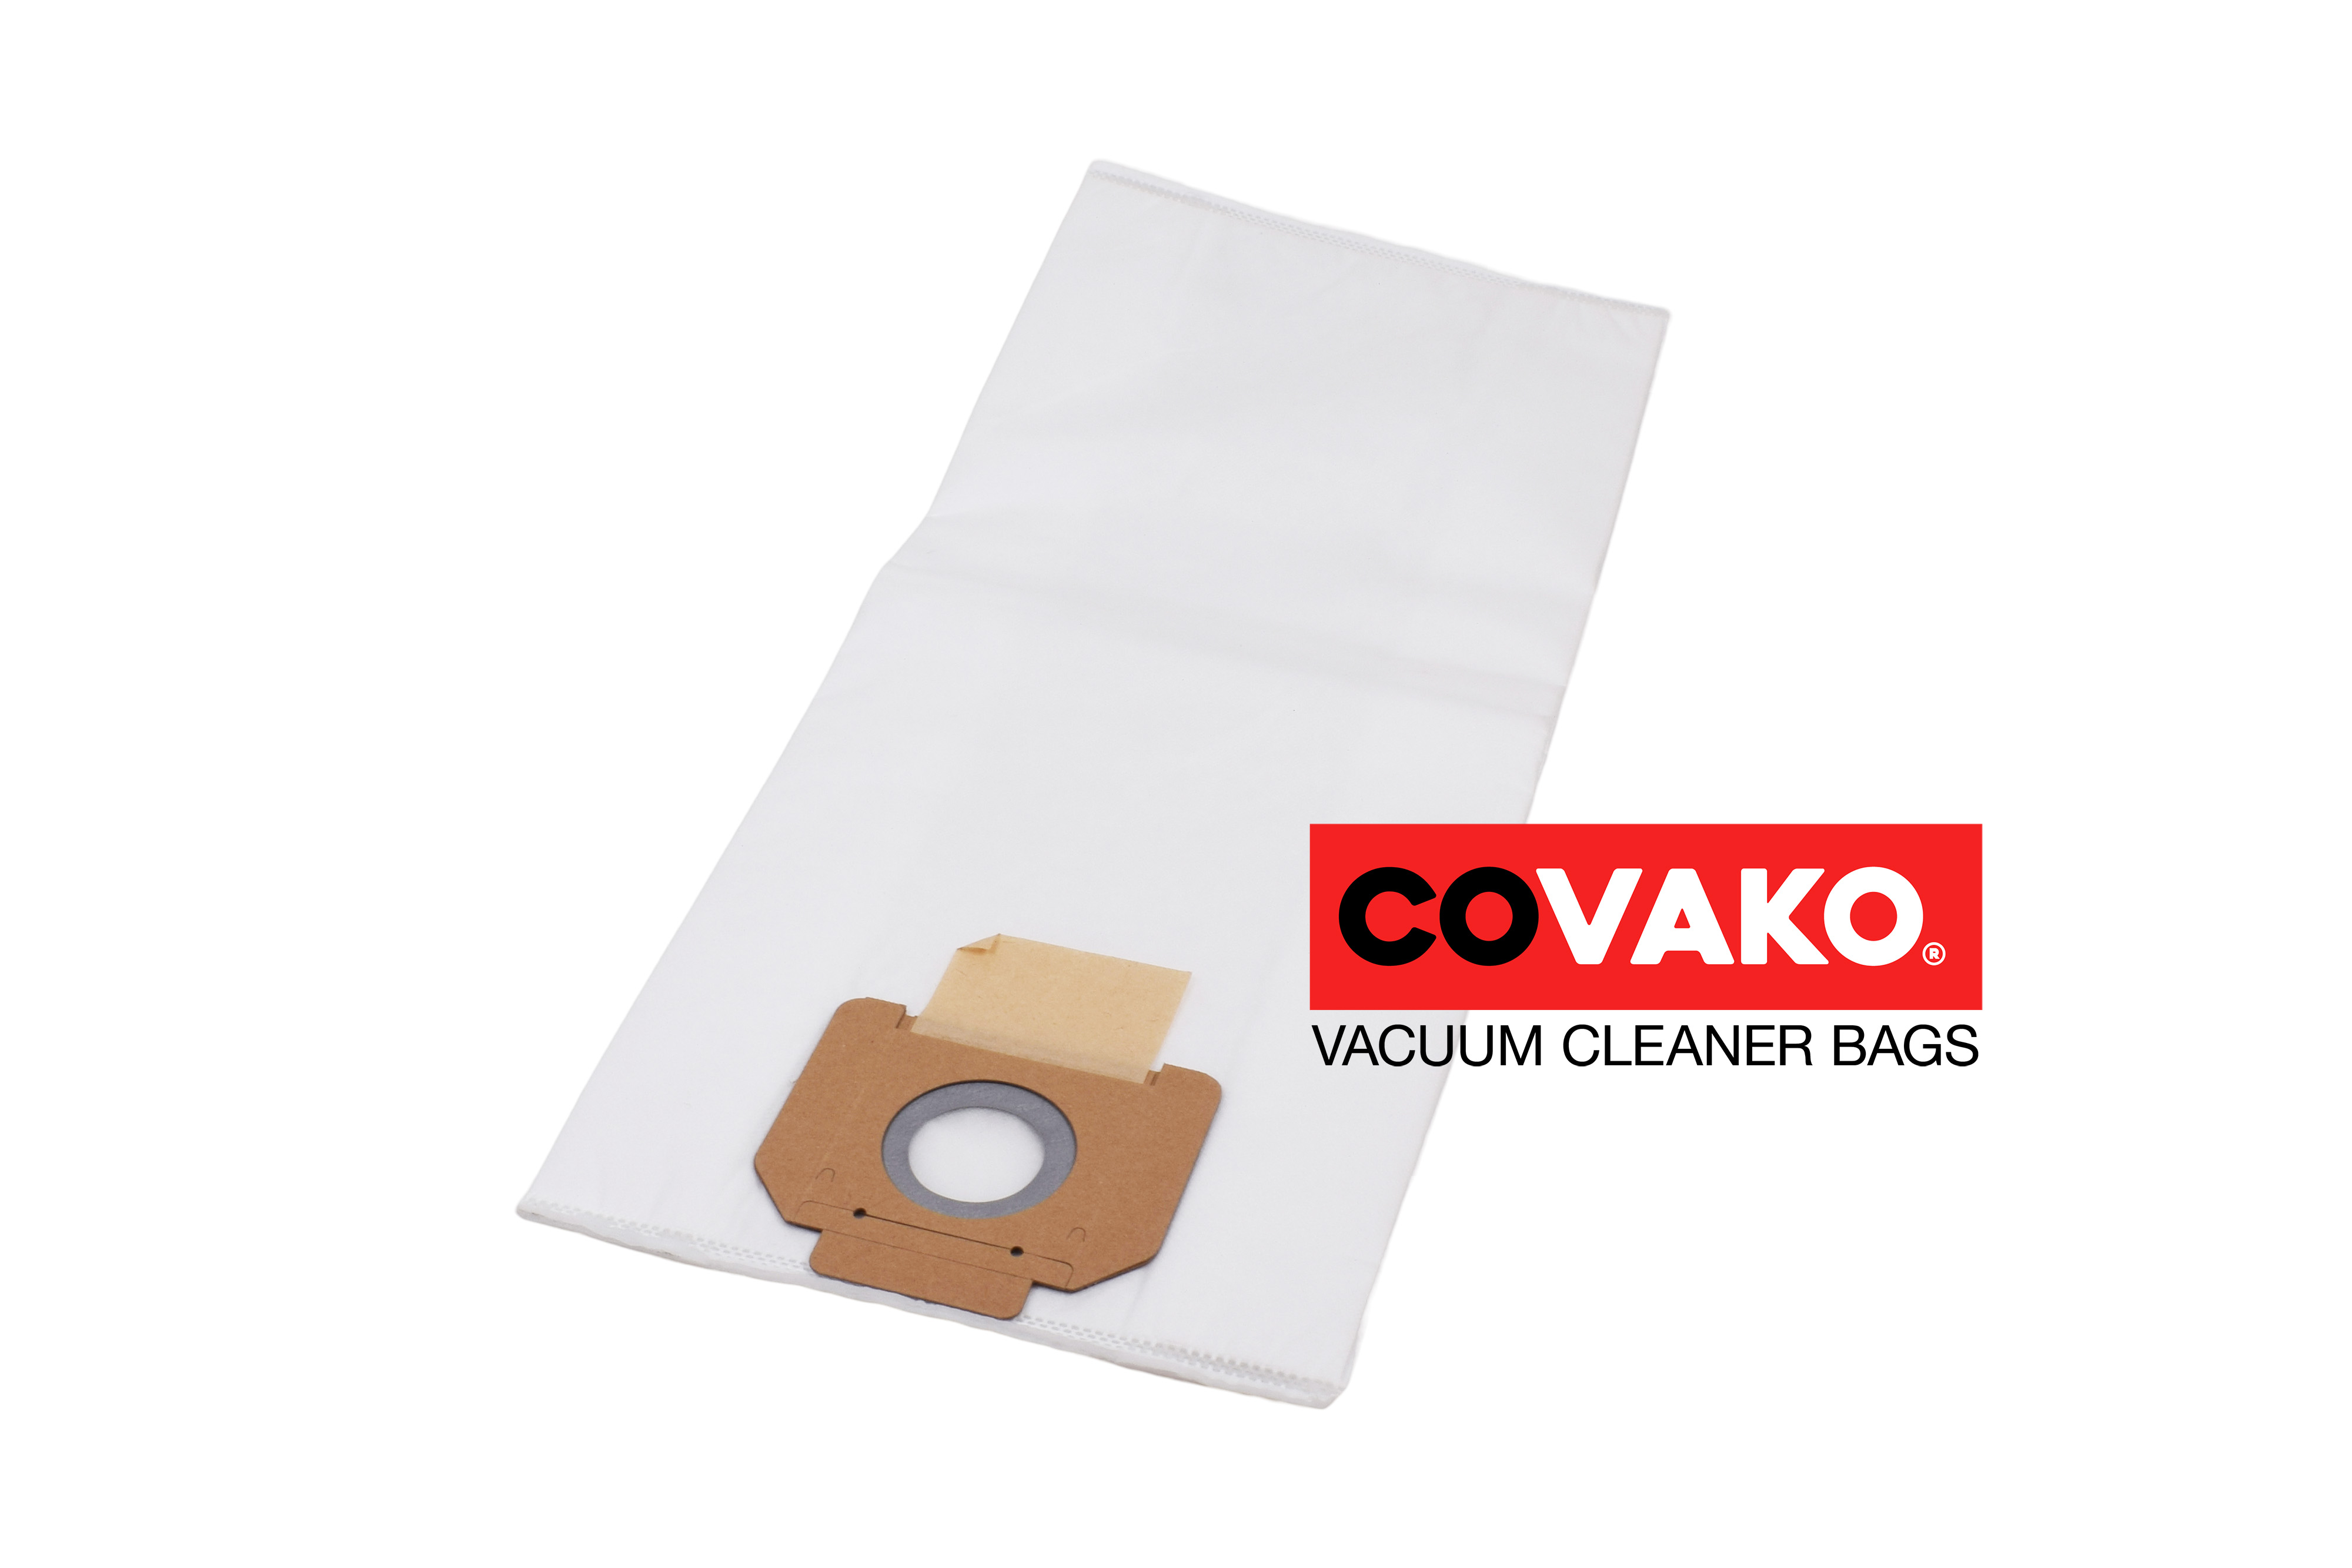 Gansow GS 40 EPB / Synthesis - Gansow vacuum cleaner bags